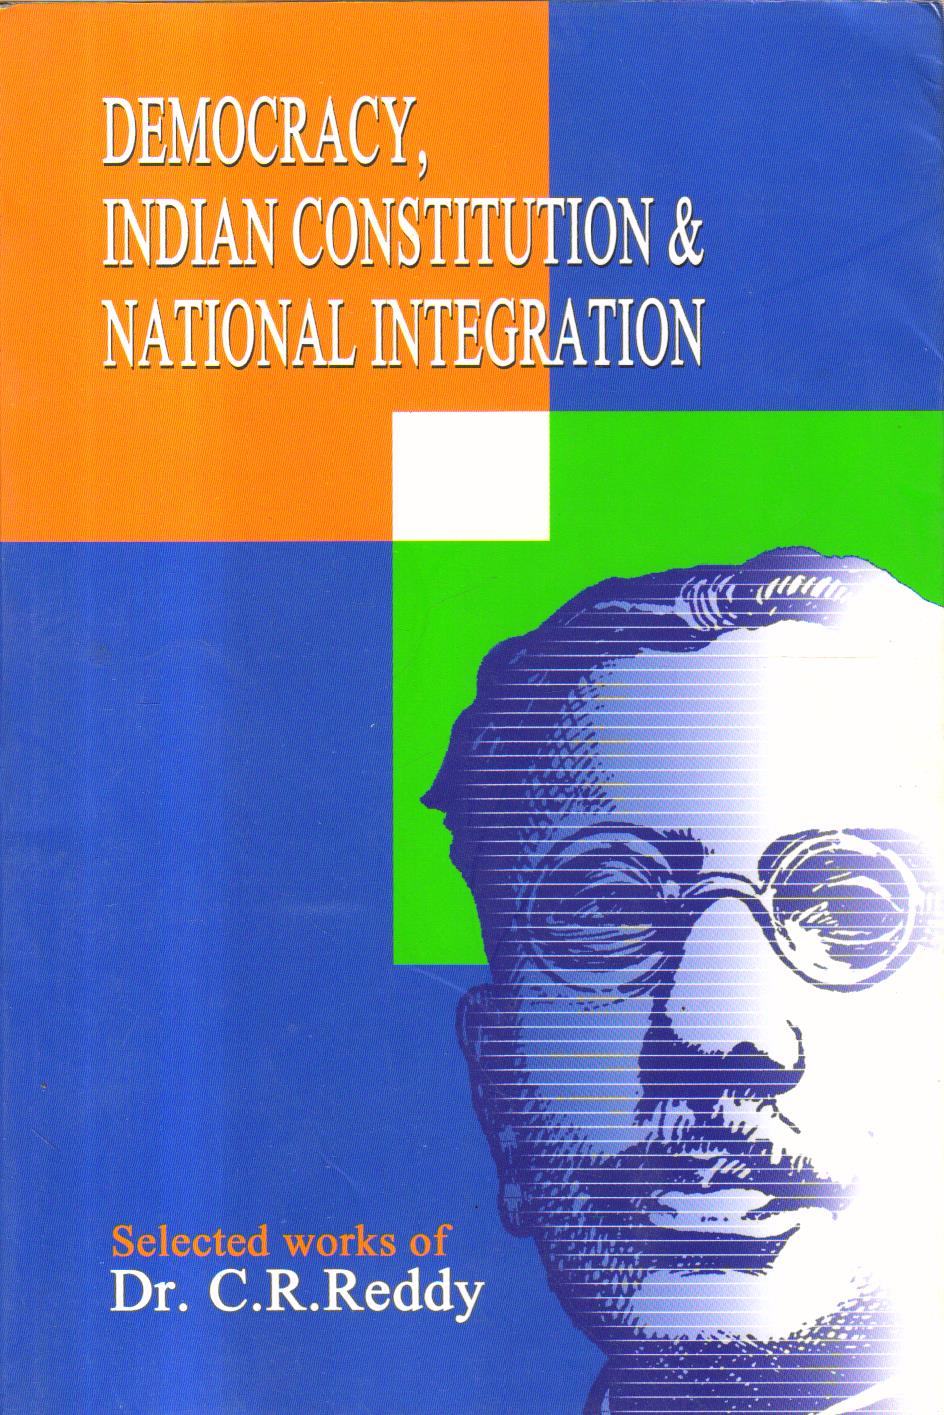 Democracy Indian Constitution and National Integration.